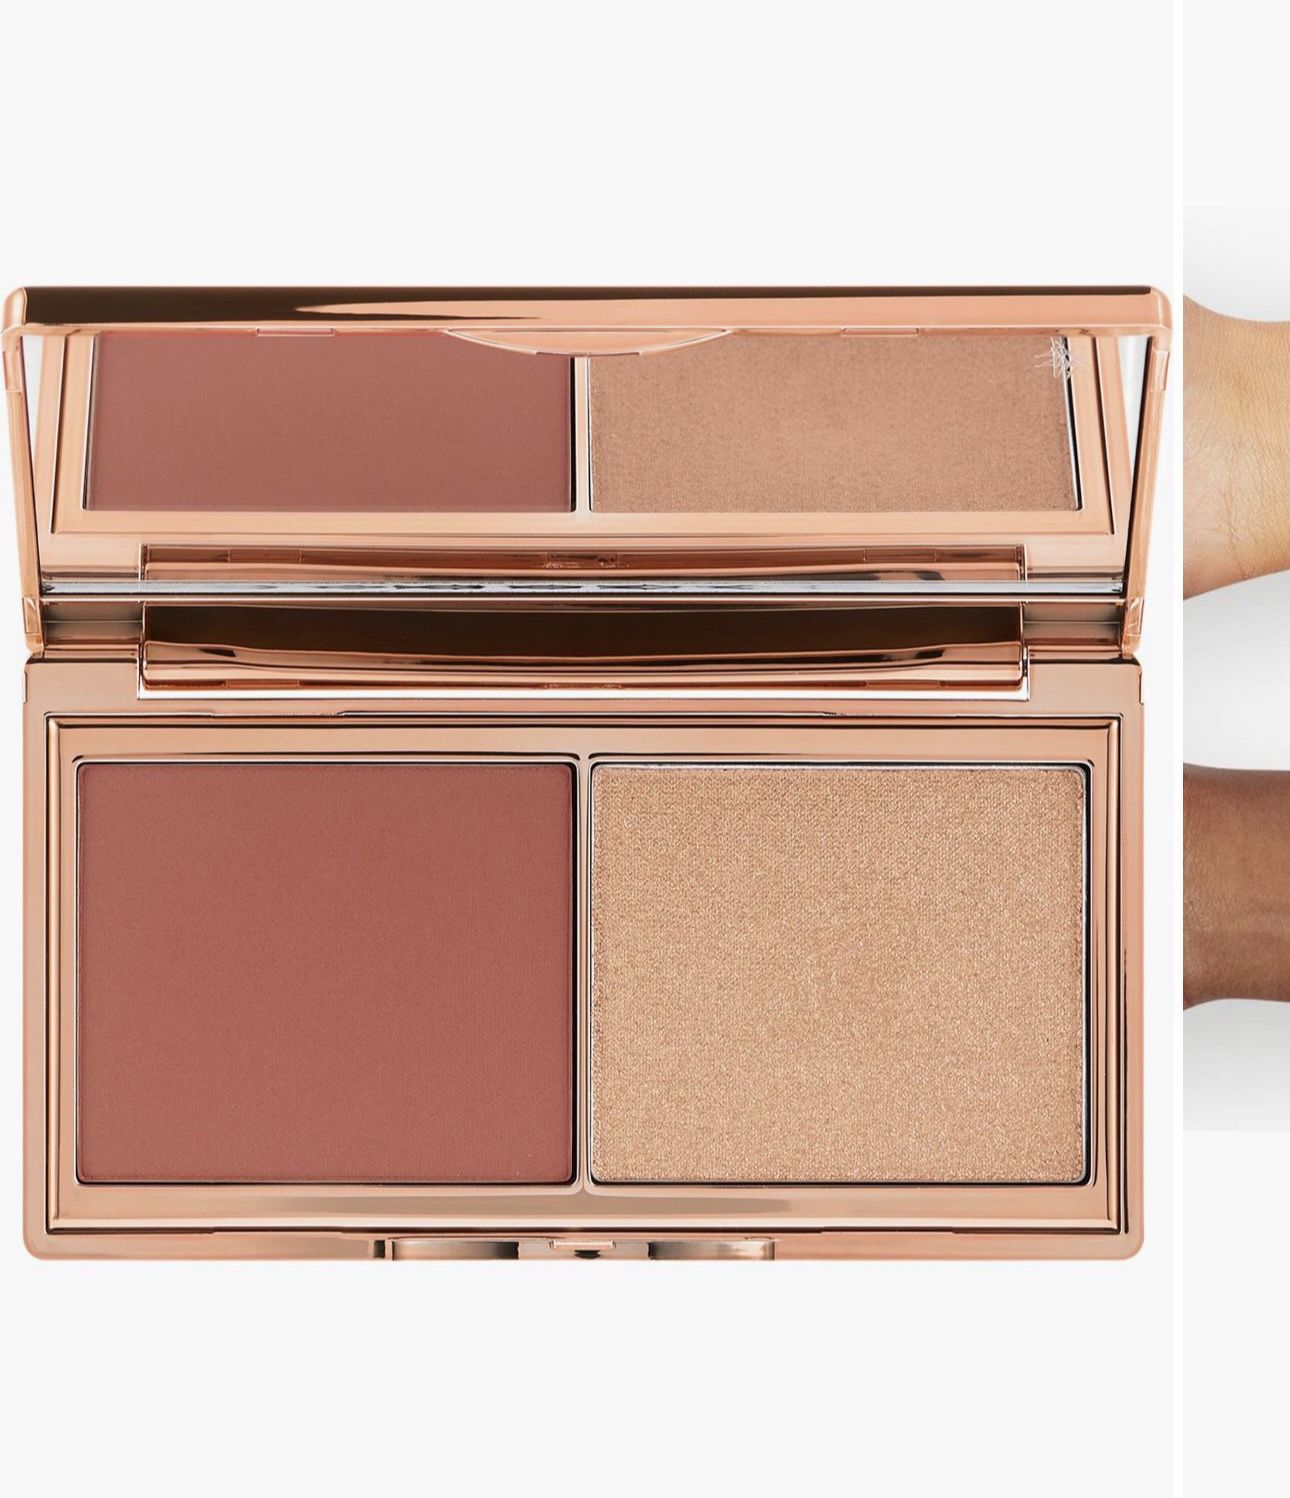 New Charlotte Tilbury Hollywood Blush & Glow Face Palette